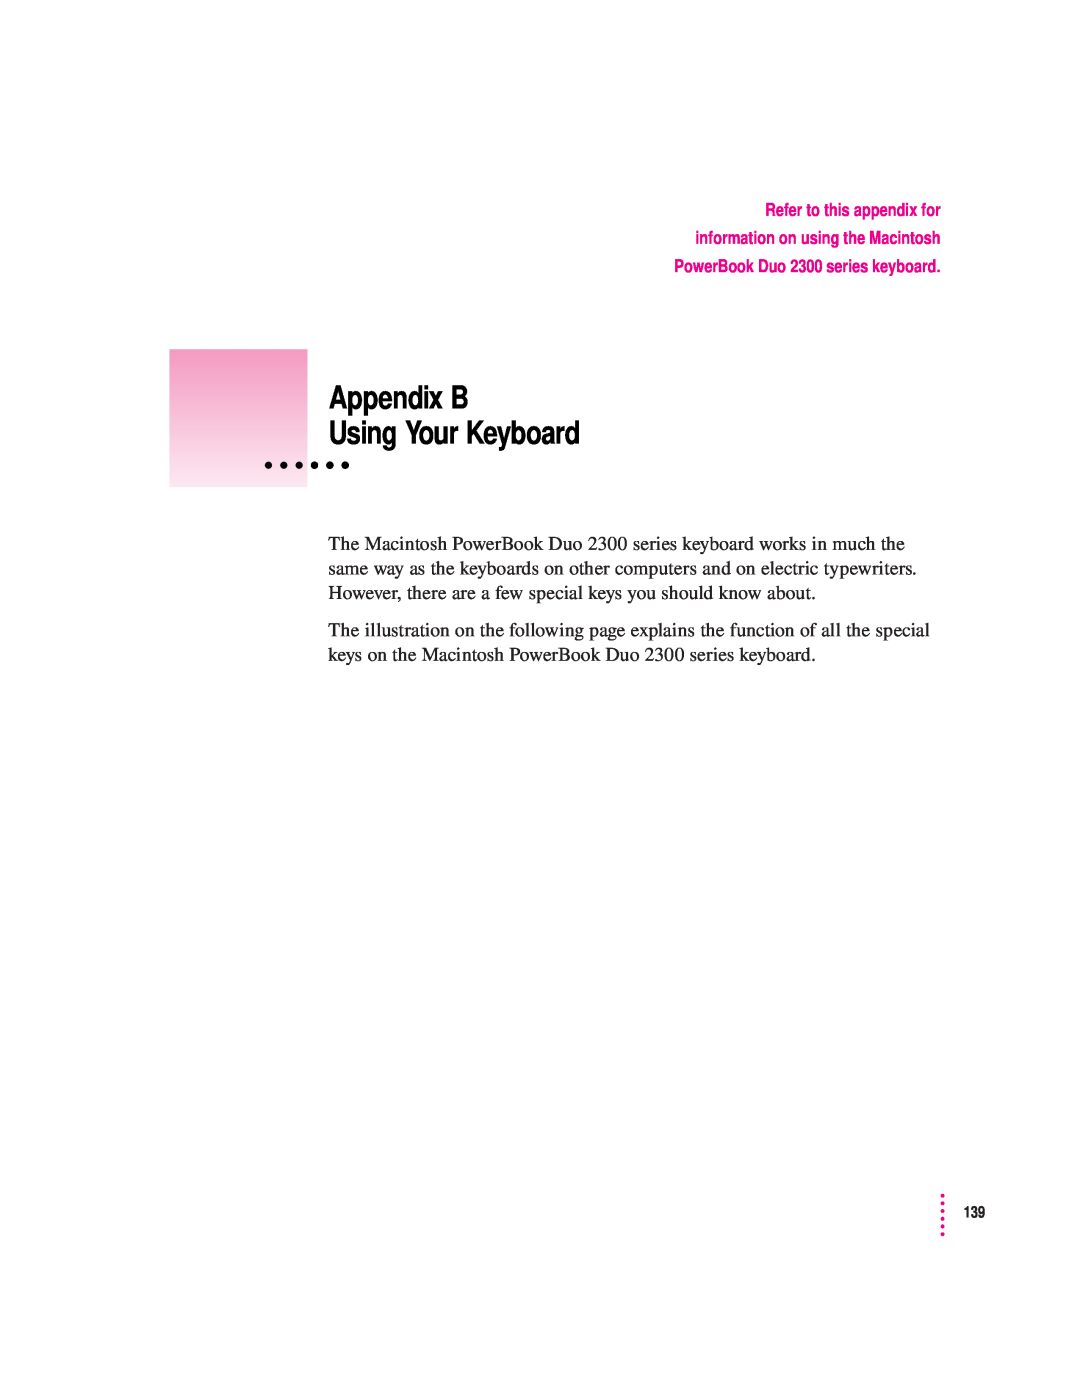 Apple 2300 Series manual Appendix B Using Your Keyboard, Refer to this appendix for information on using the Macintosh 